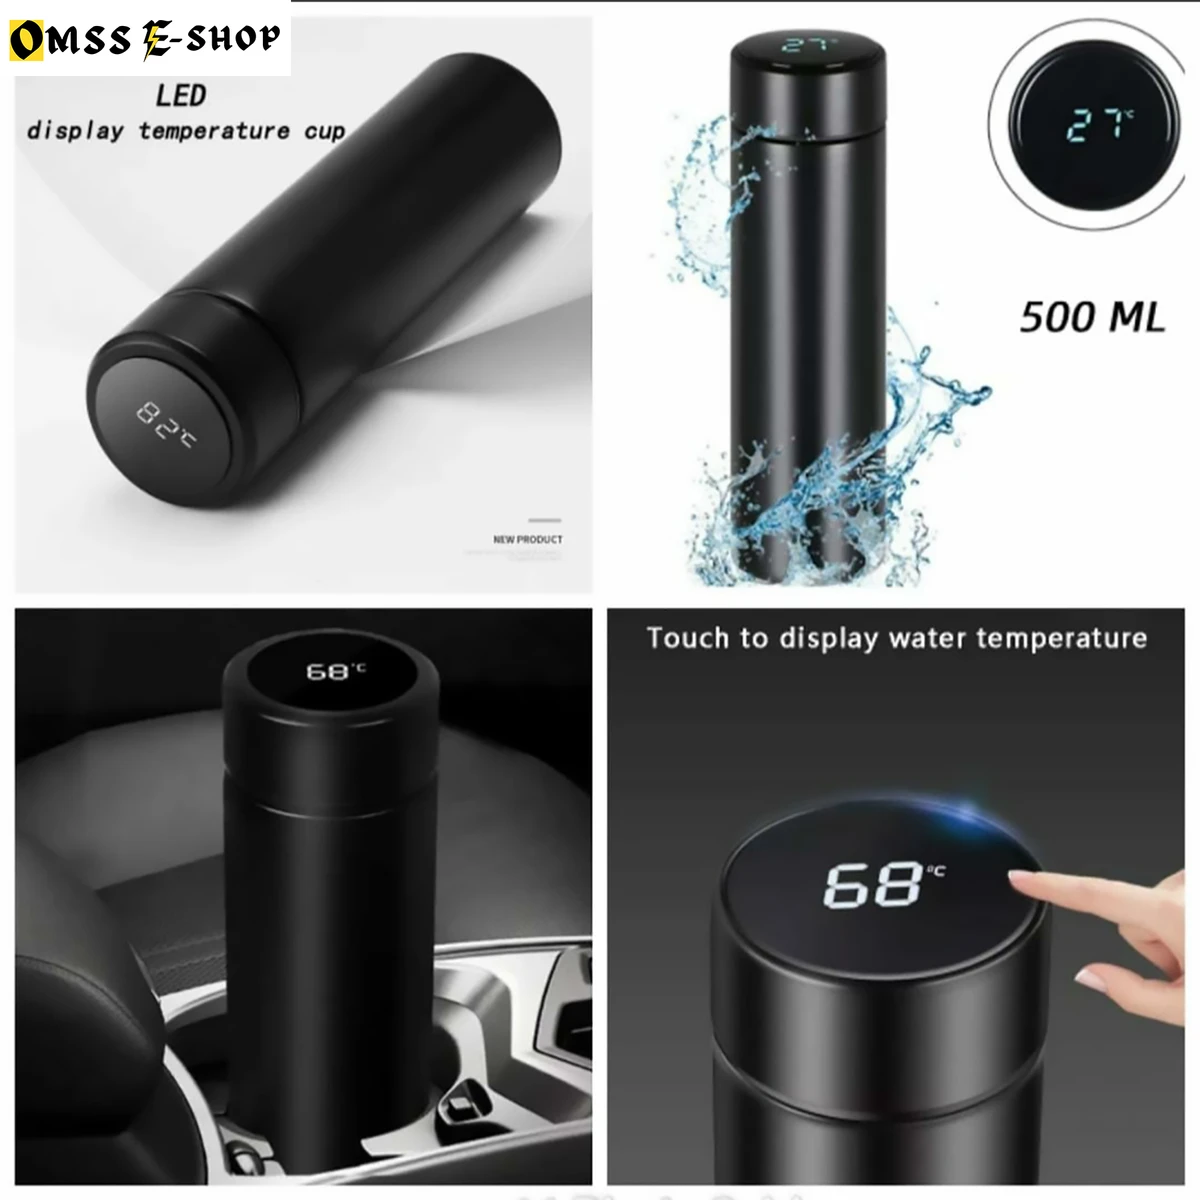 500Ml Smart Thermos Cup, Led Temperature Display Water Bottle, Stainless Steel Vacuum Travel Mug For 24 Hours, Hot And Cold Tea Coffee Vacuum Thermoses Cup For School, Home, Office